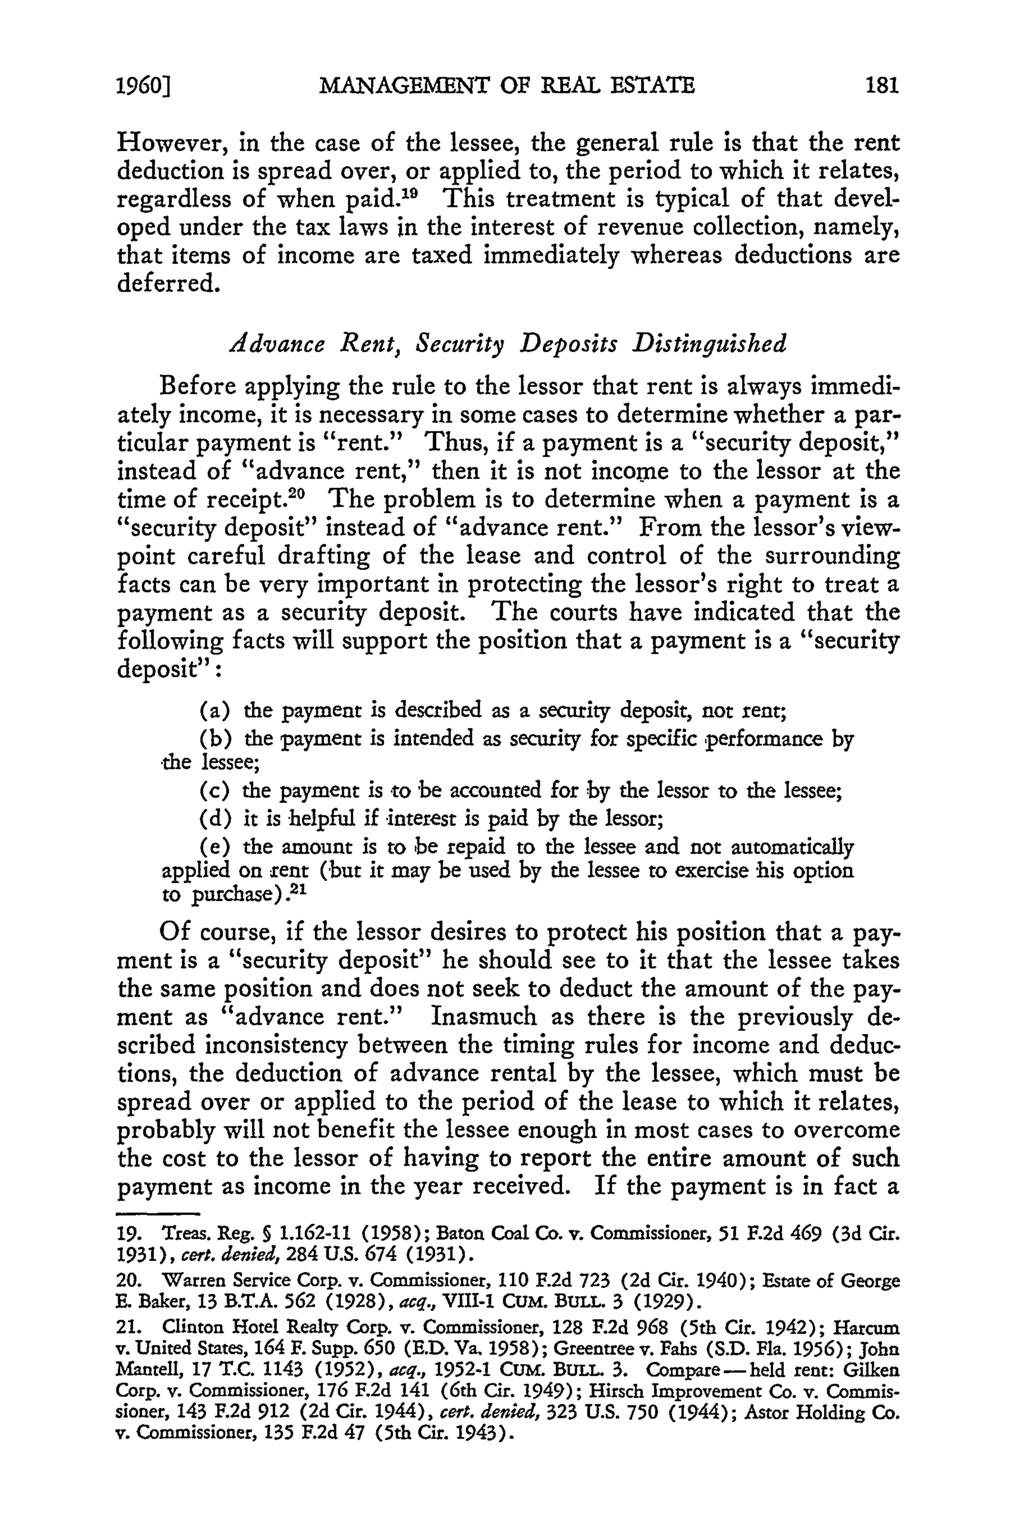 1960] MANAGEMENT OF REAL BSTATE However, in the case of the lessee, the general rule is that the rent deduction is spread over, or applied to, the period to which it relates, regardless of when paid.